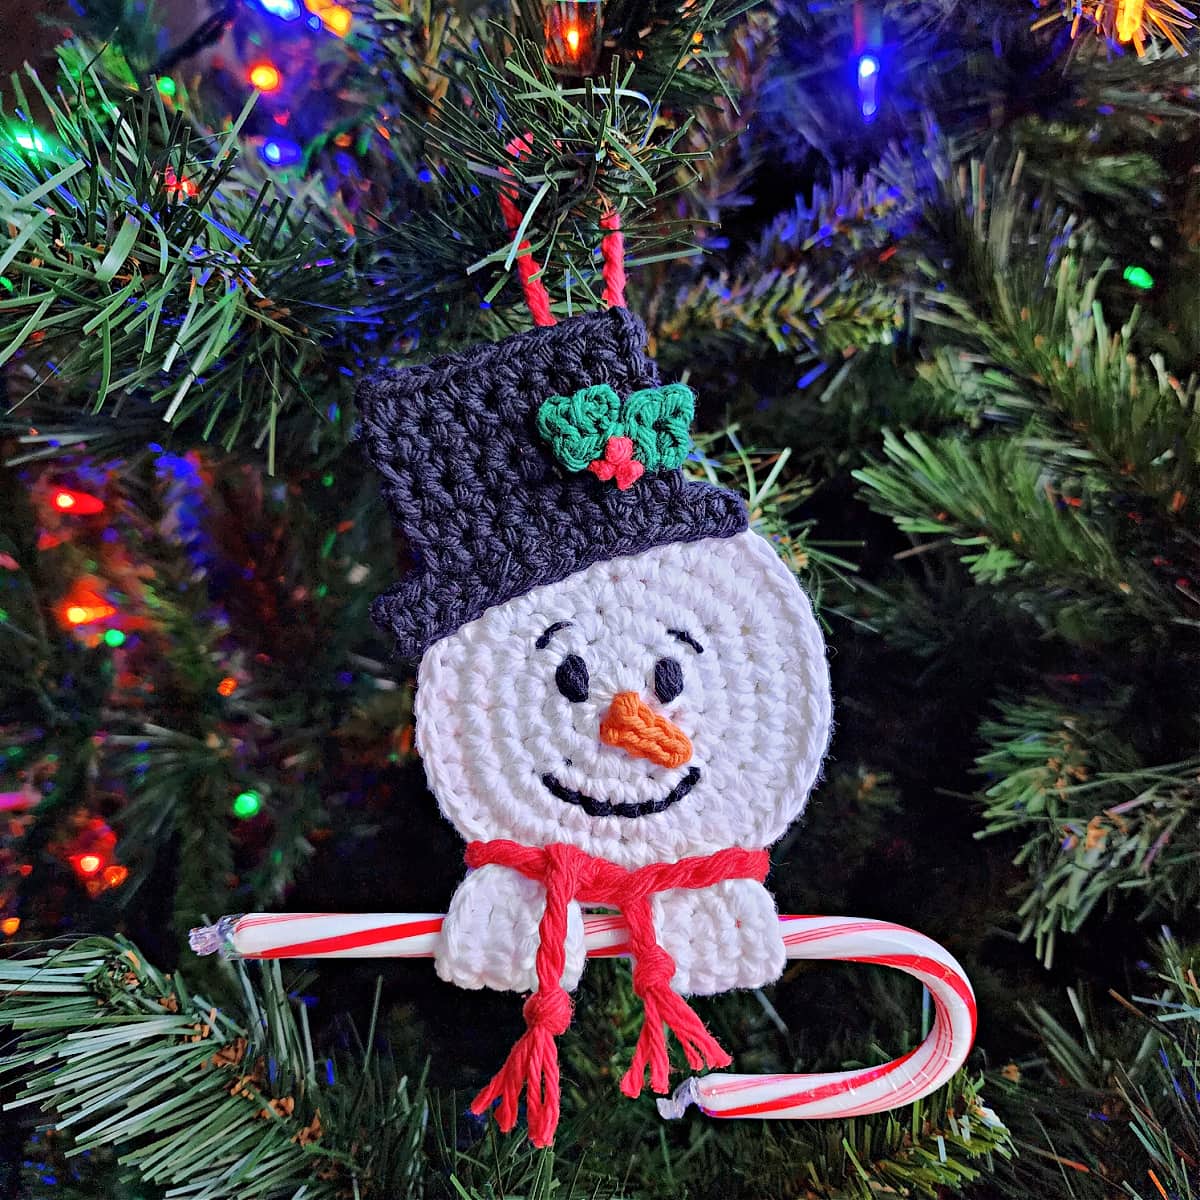 crochet snowman candy cane holder ornament hanging on christmas tree with candy cane